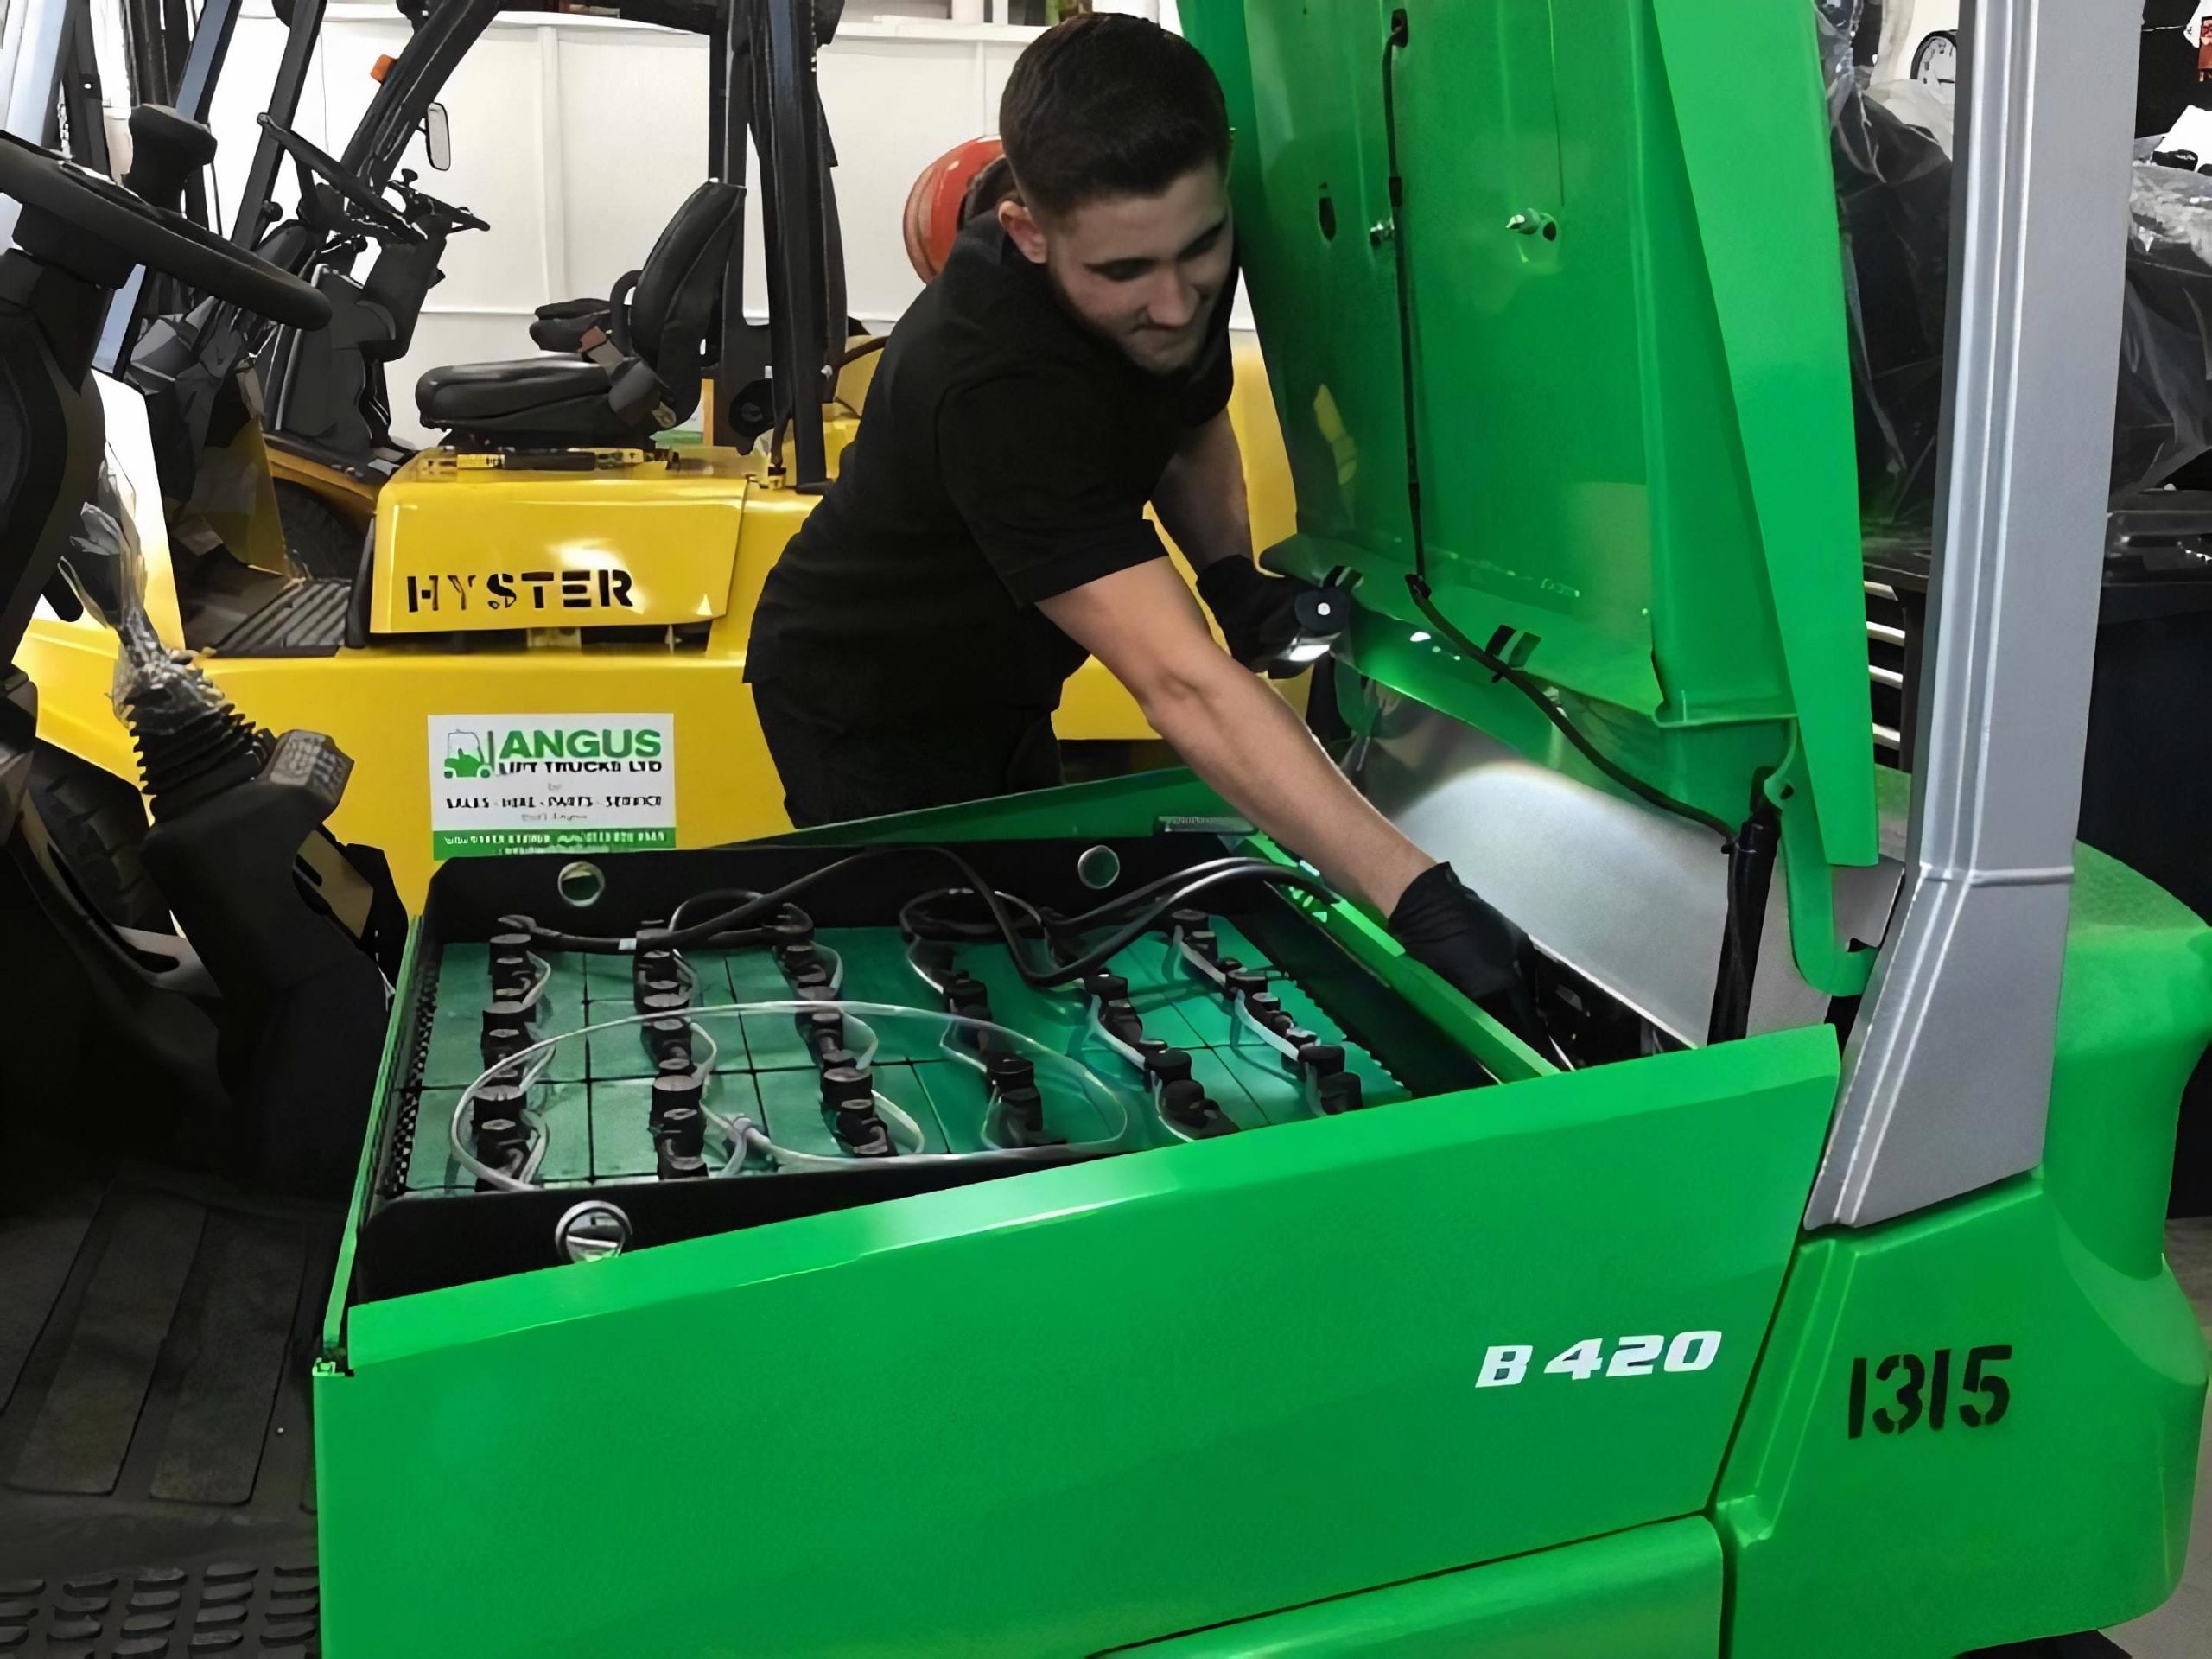 Forklifts Service, Maintenance and Repairs across the UK, in areas like Leicester, Northampton, Nottingham, Derby, Birmingham, Warwick, East Midlands, West Midlands